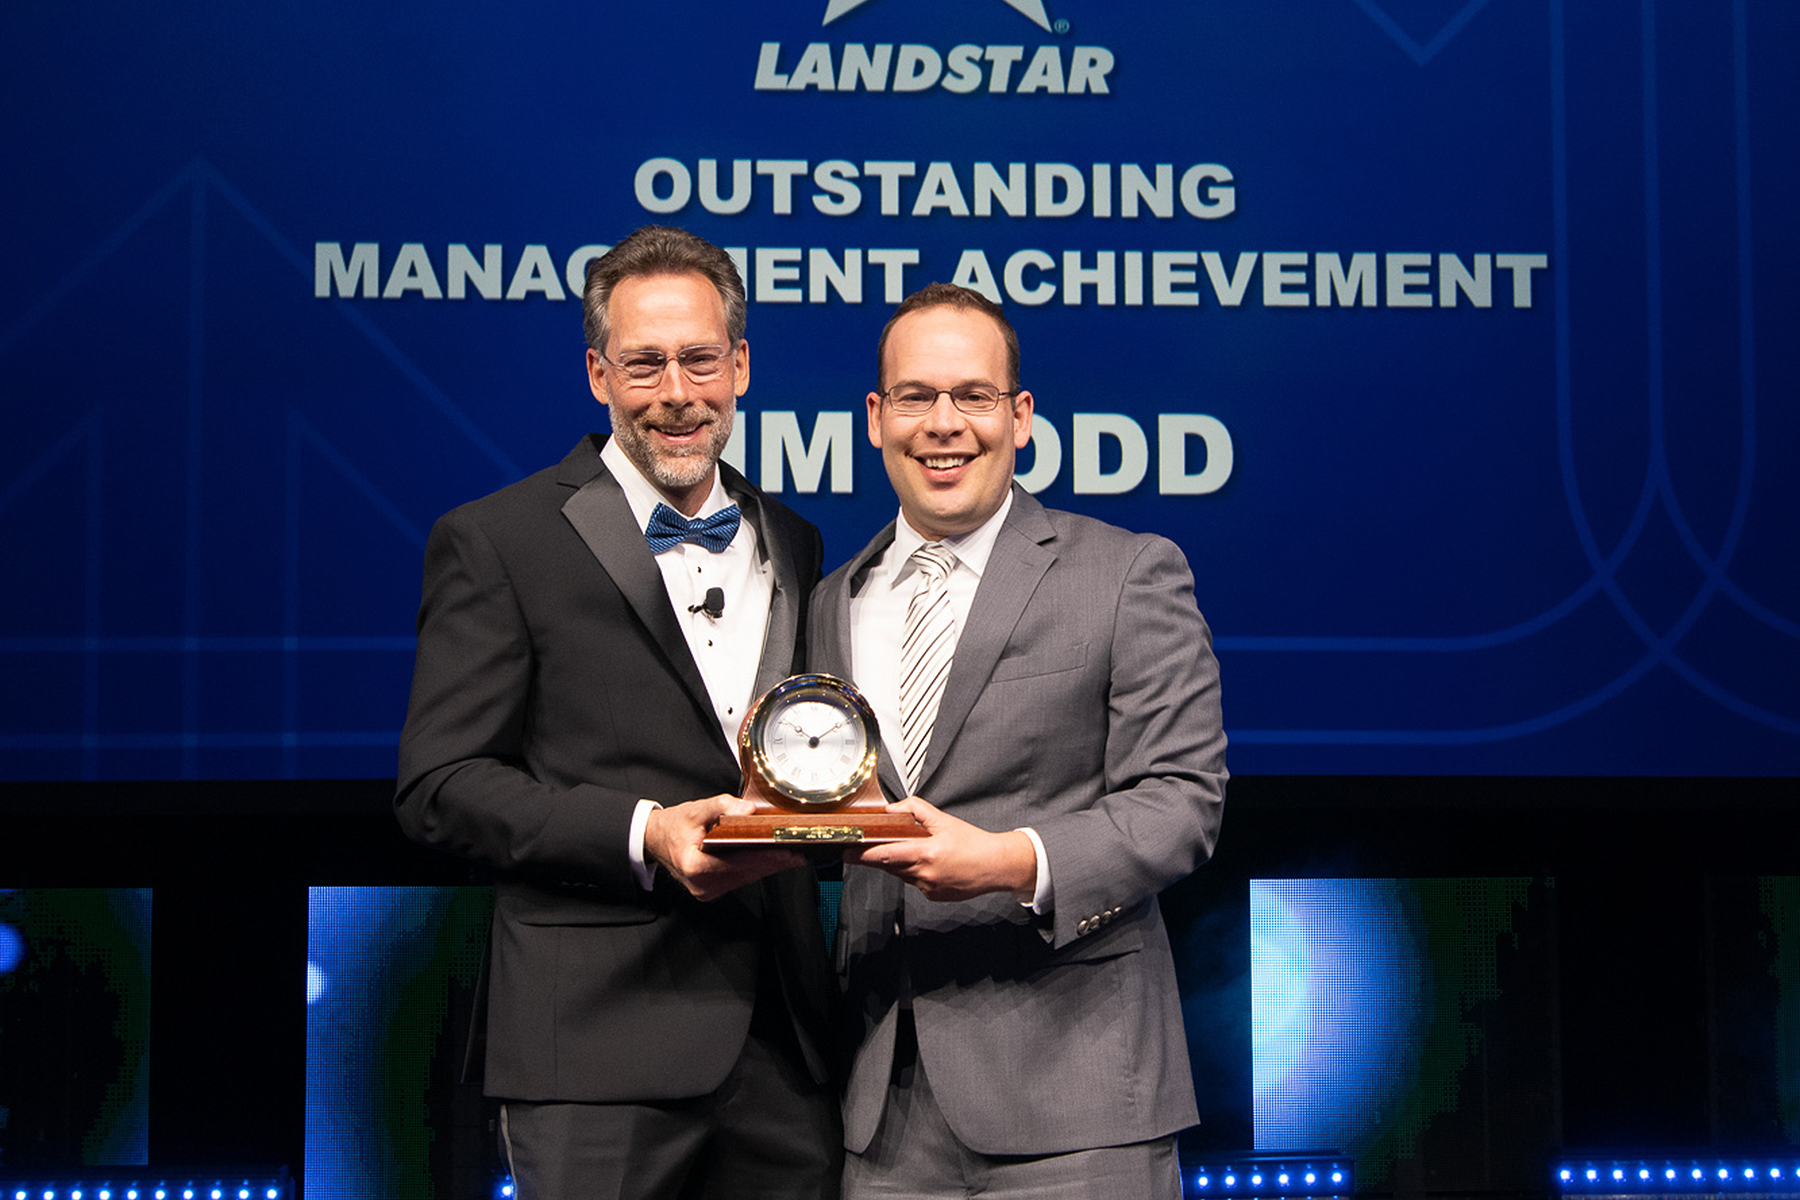 Landstar President and CEO Frank Lonegro (left) presents Chief Financial Officer Jim Todd (right) with the Landstar Outstanding Management Achievement Award